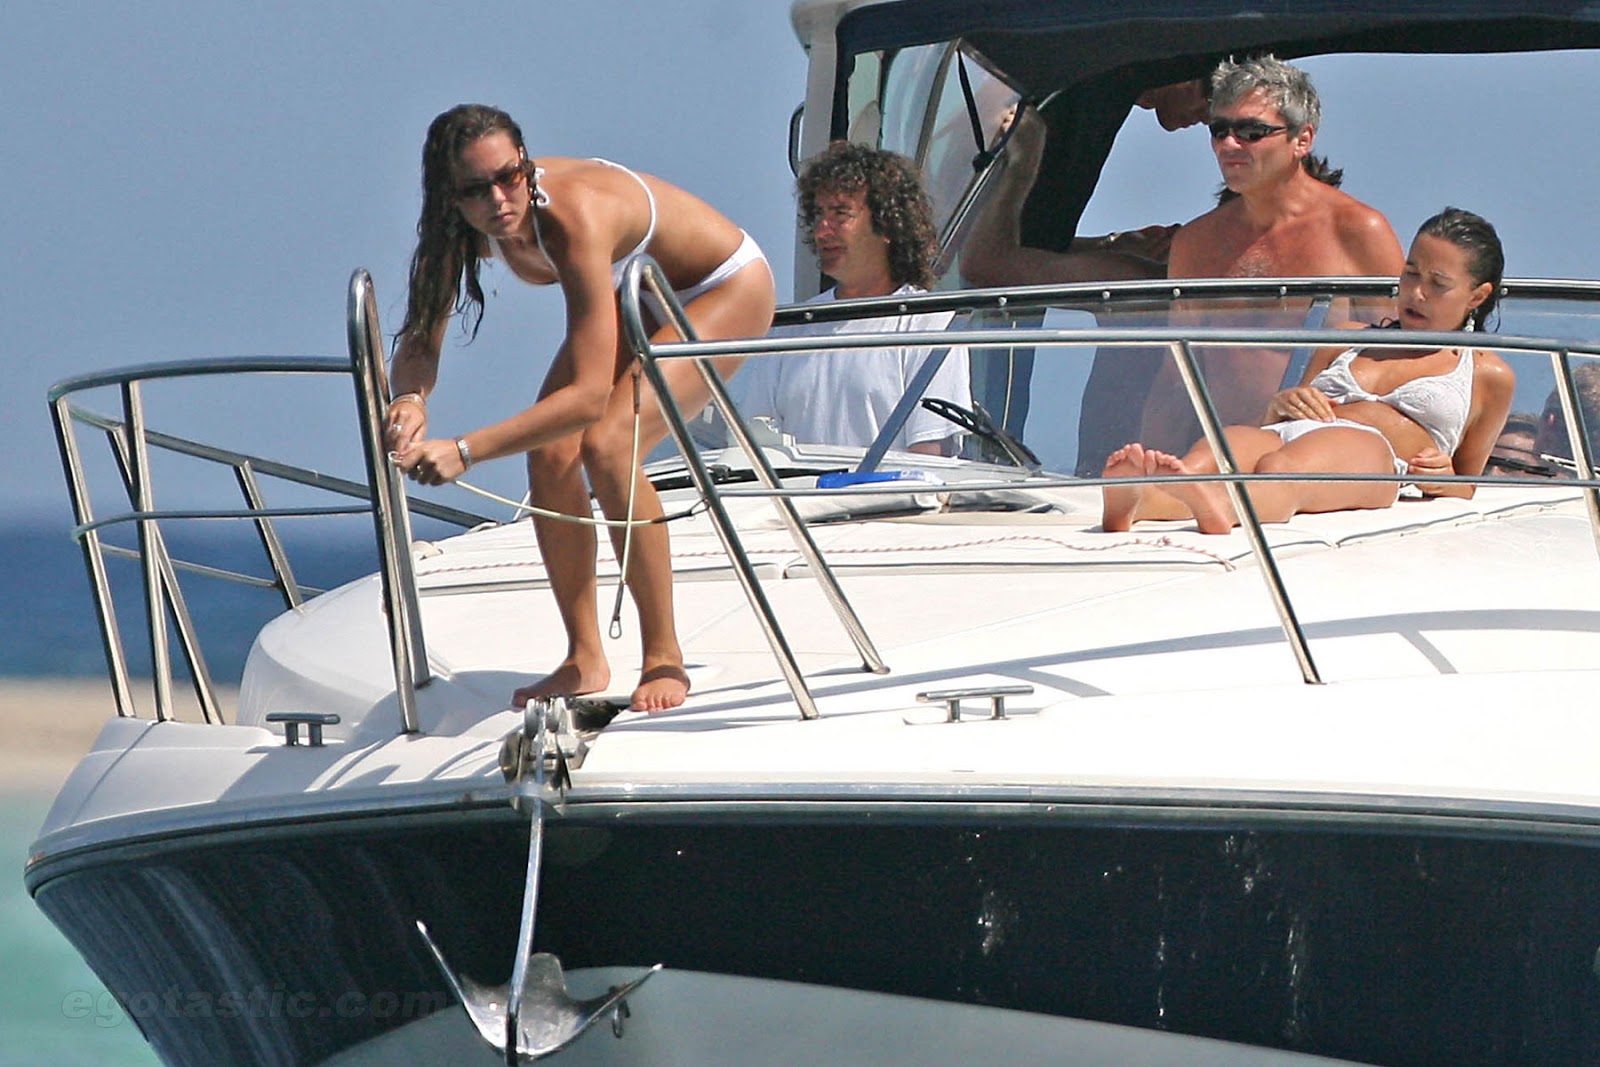 Barefoot Celebrities: Pippa and Kate Middleton barefoot on a yacht.